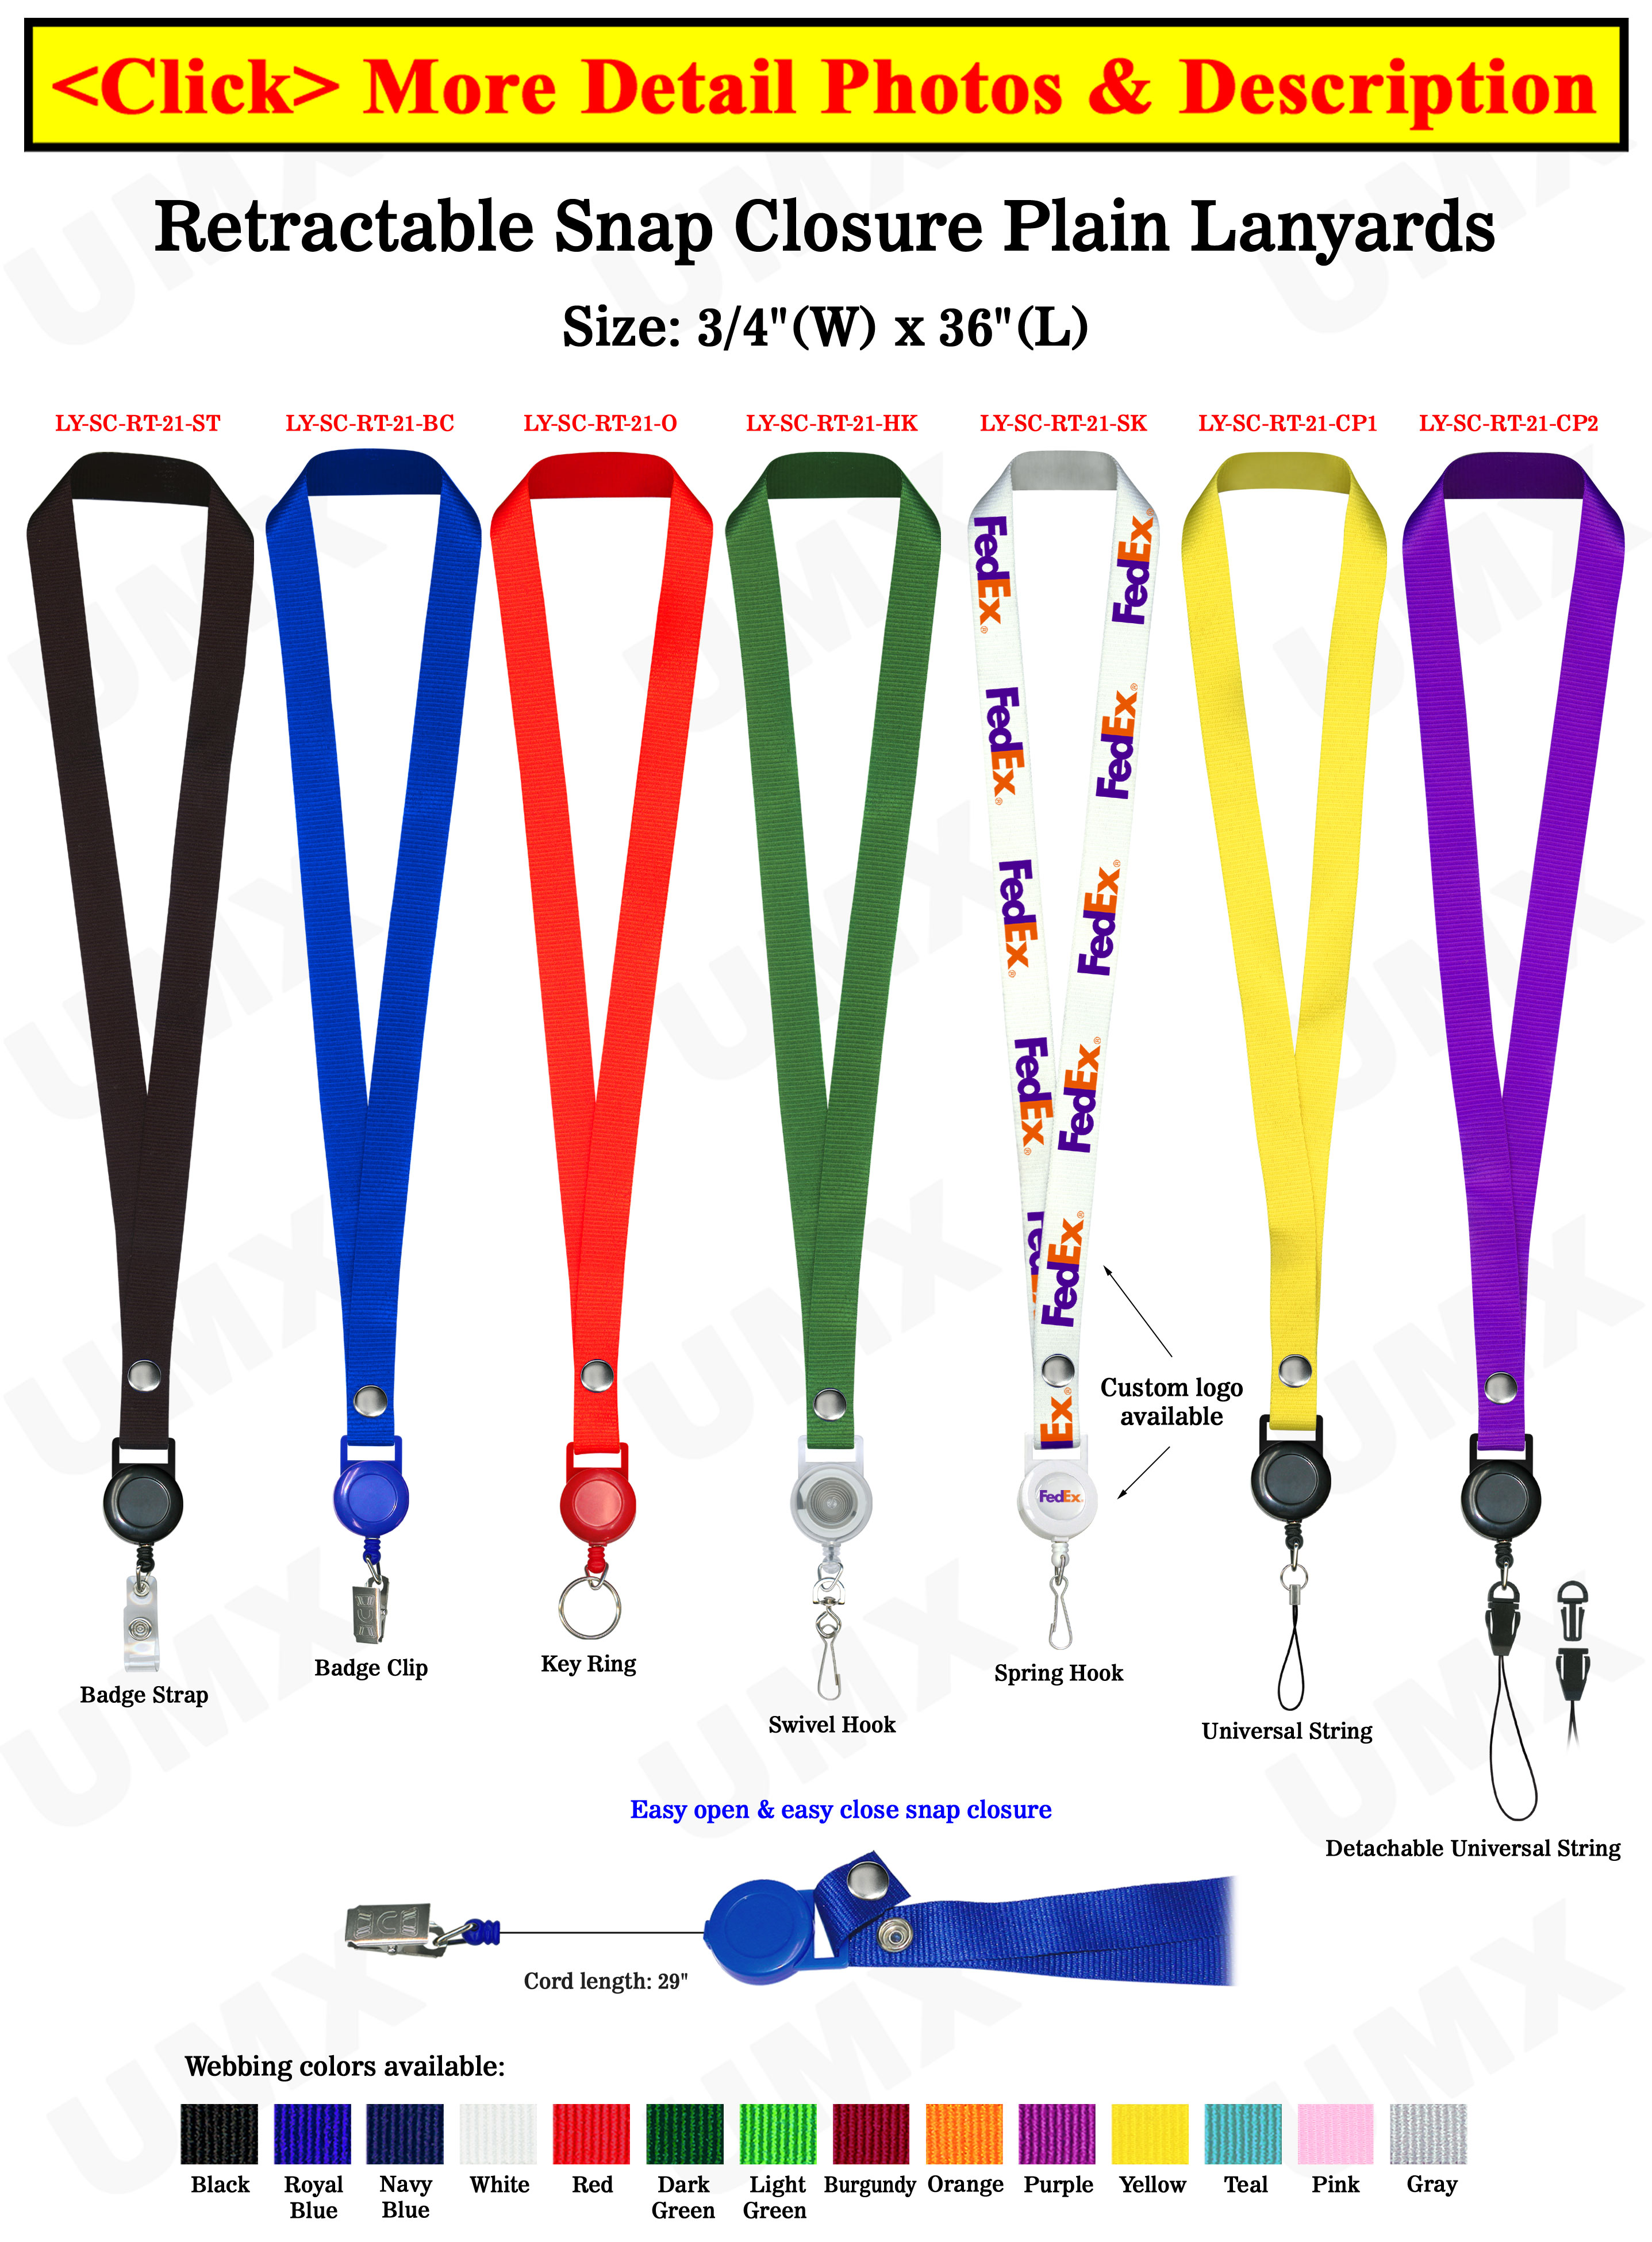 Retractable Name Holder Lanyards: with 3/4 Snap Closure Plain Color Neck  Lanyard Straps 